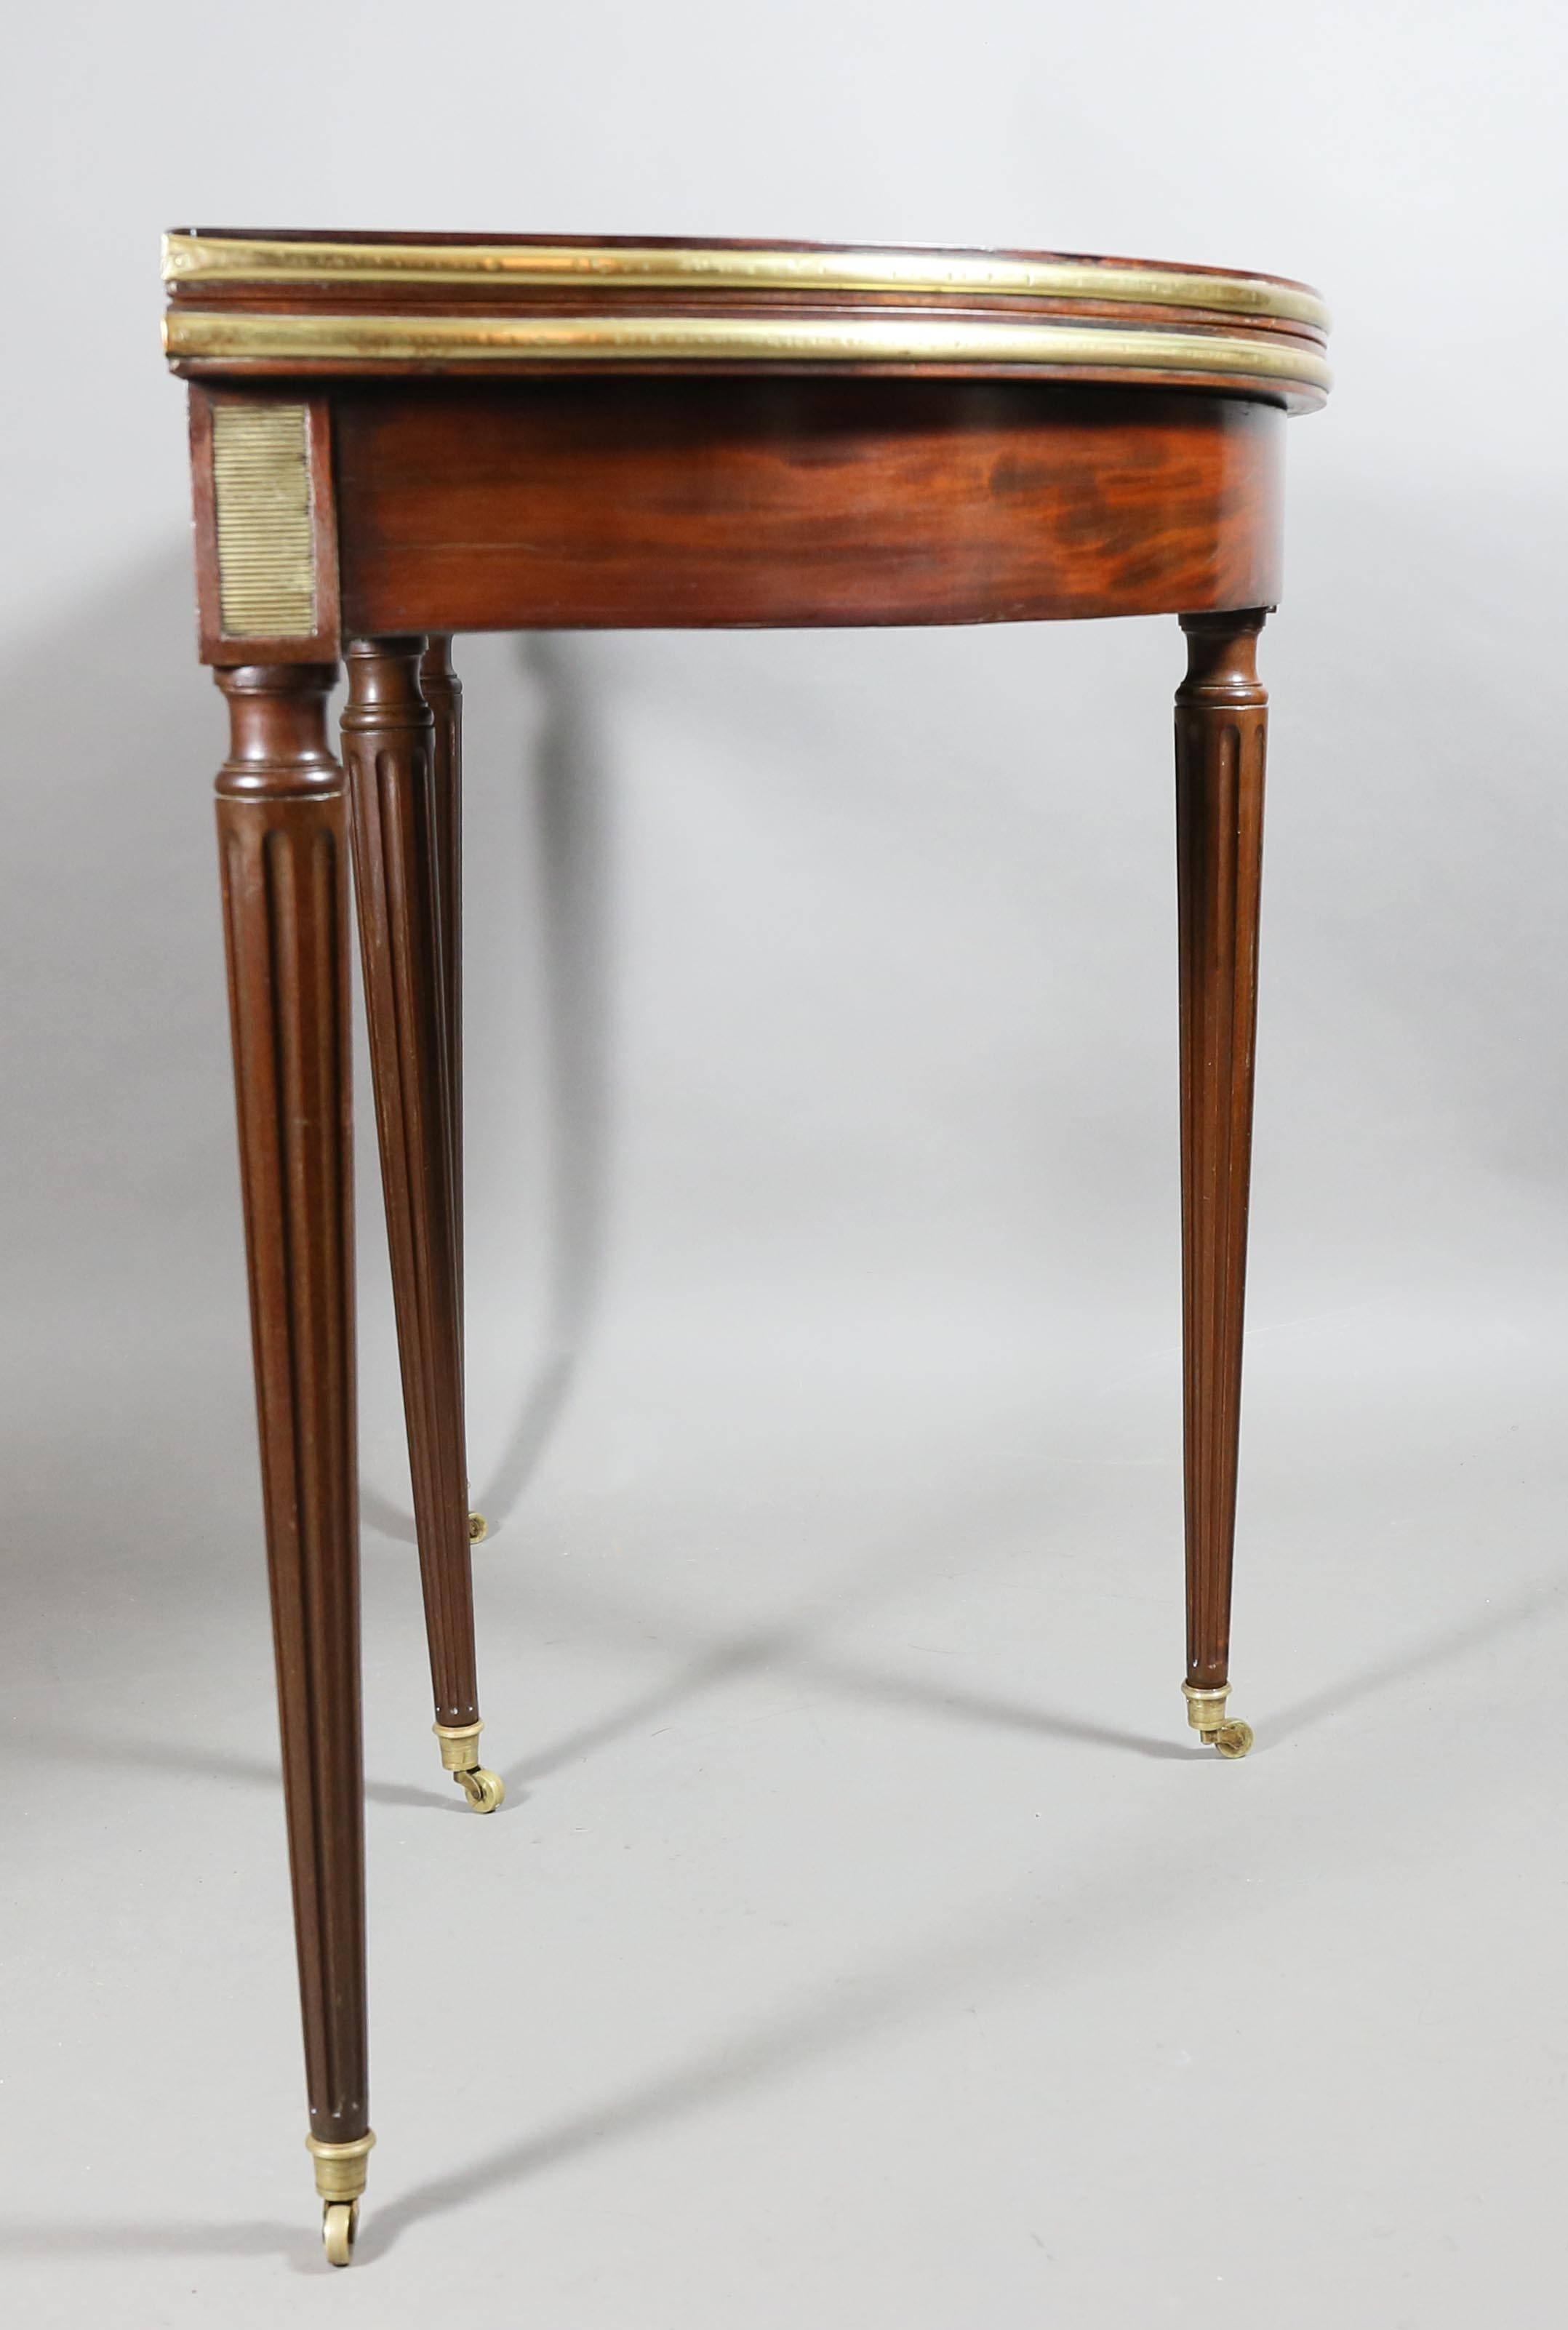 French Directoire Style Mahogany and Brass Mounted Console or Games Table